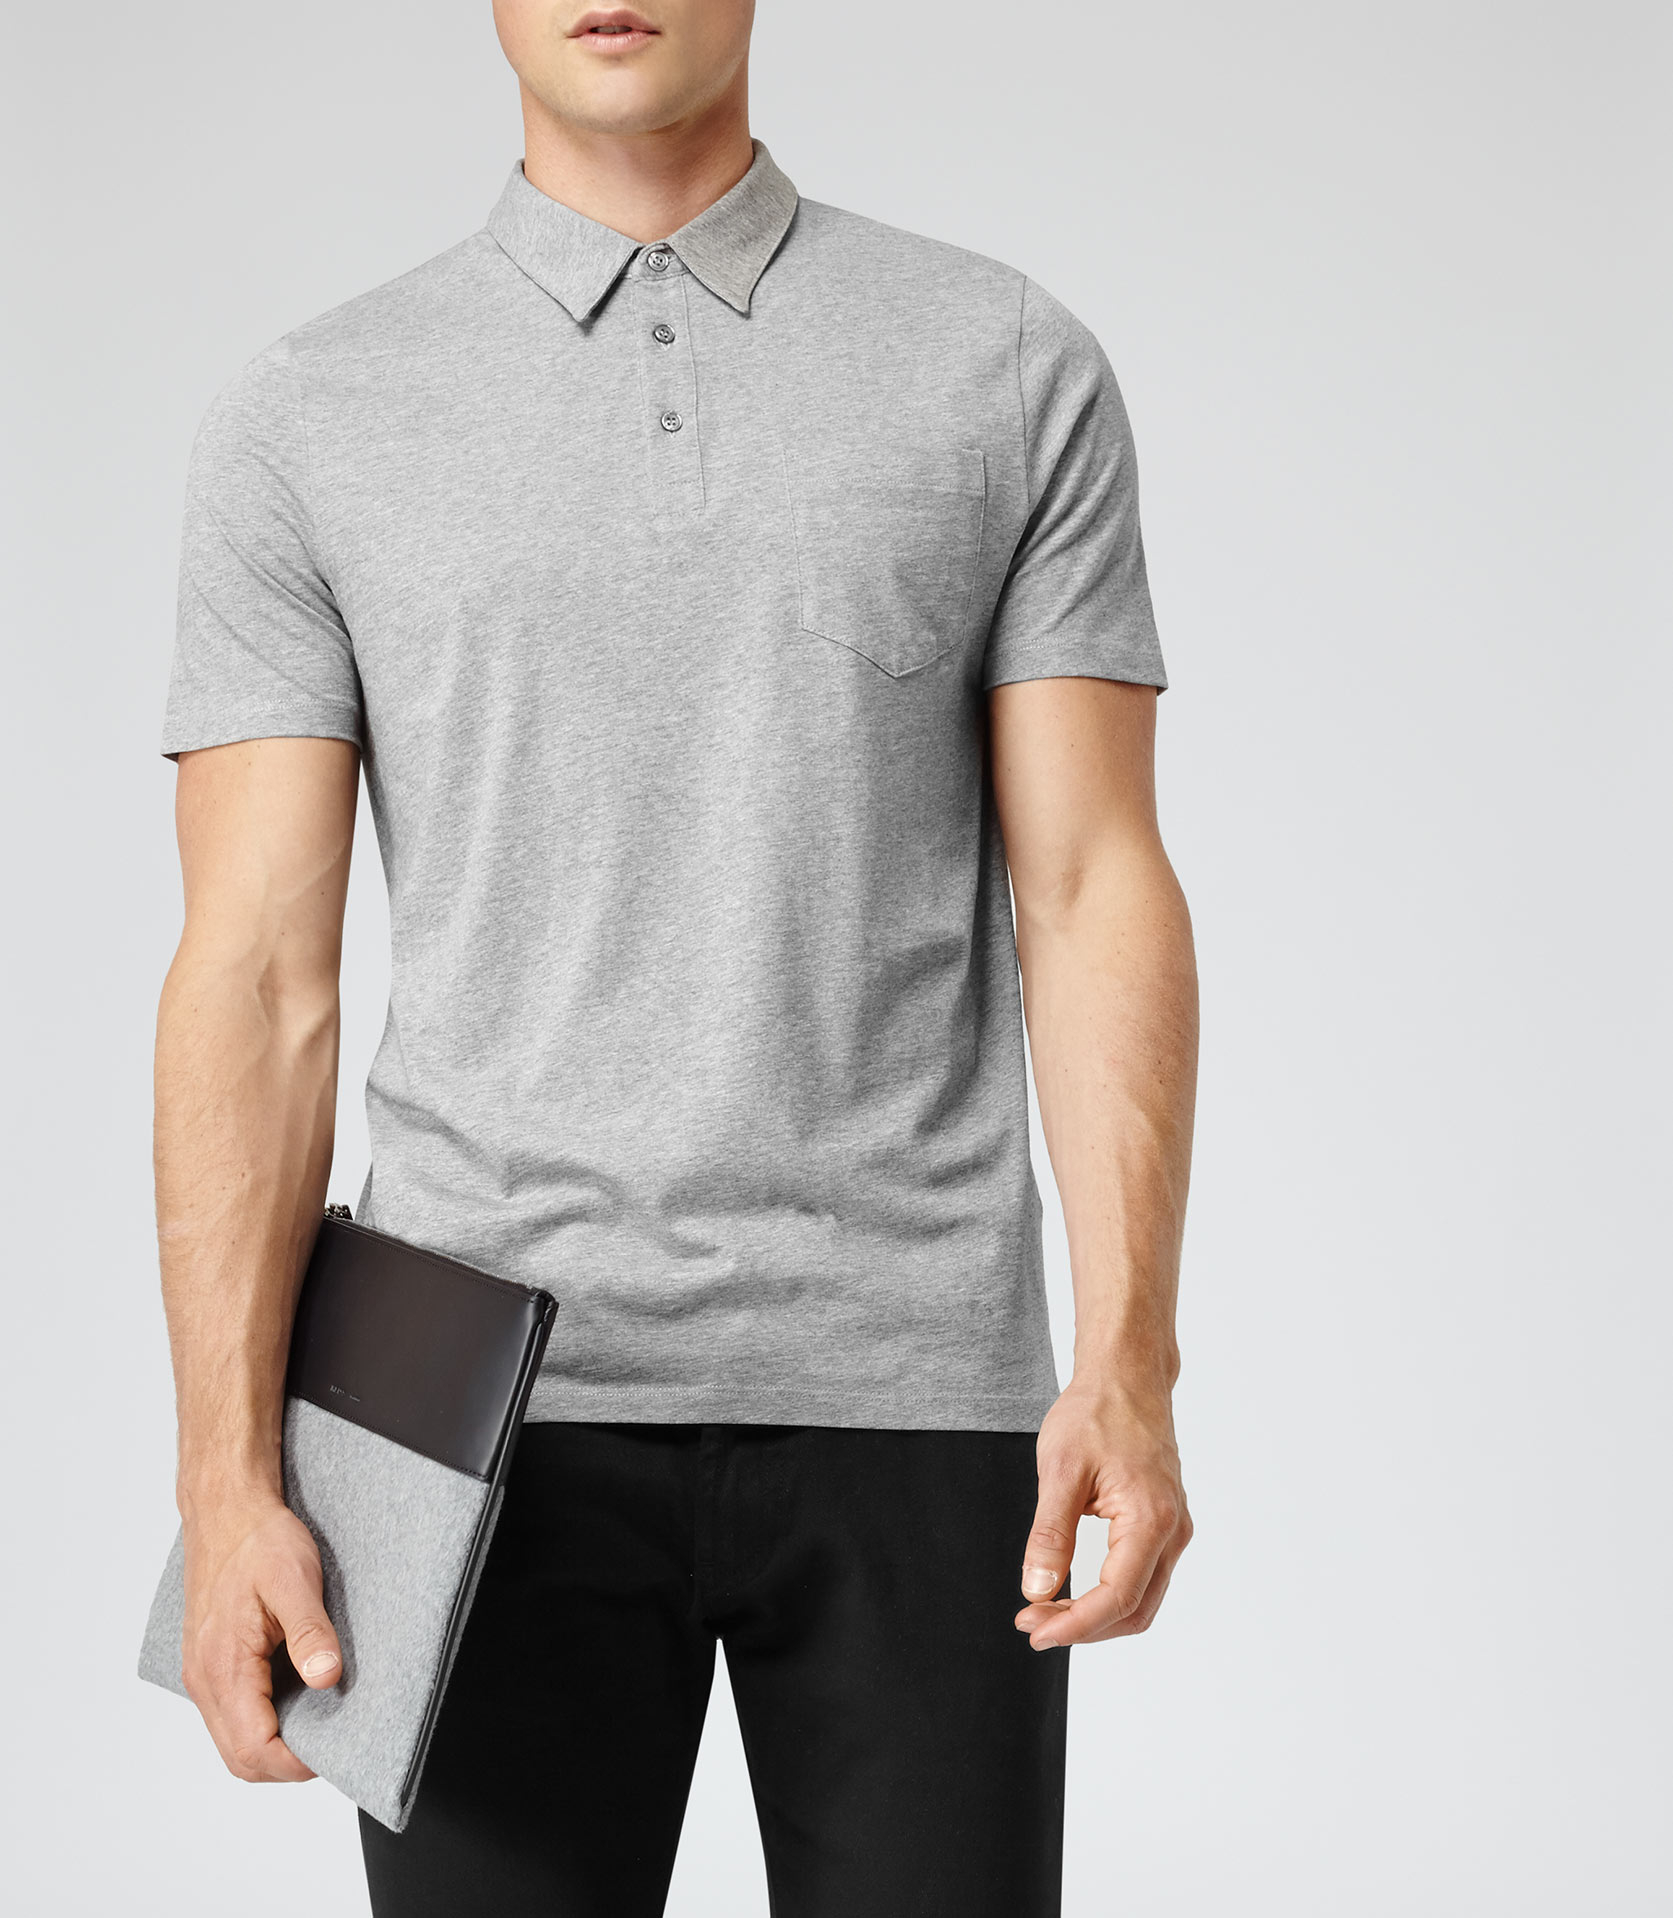 Reiss Wilson Patch Pocket Polo Shirt in Grey (Gray) for Men - Lyst